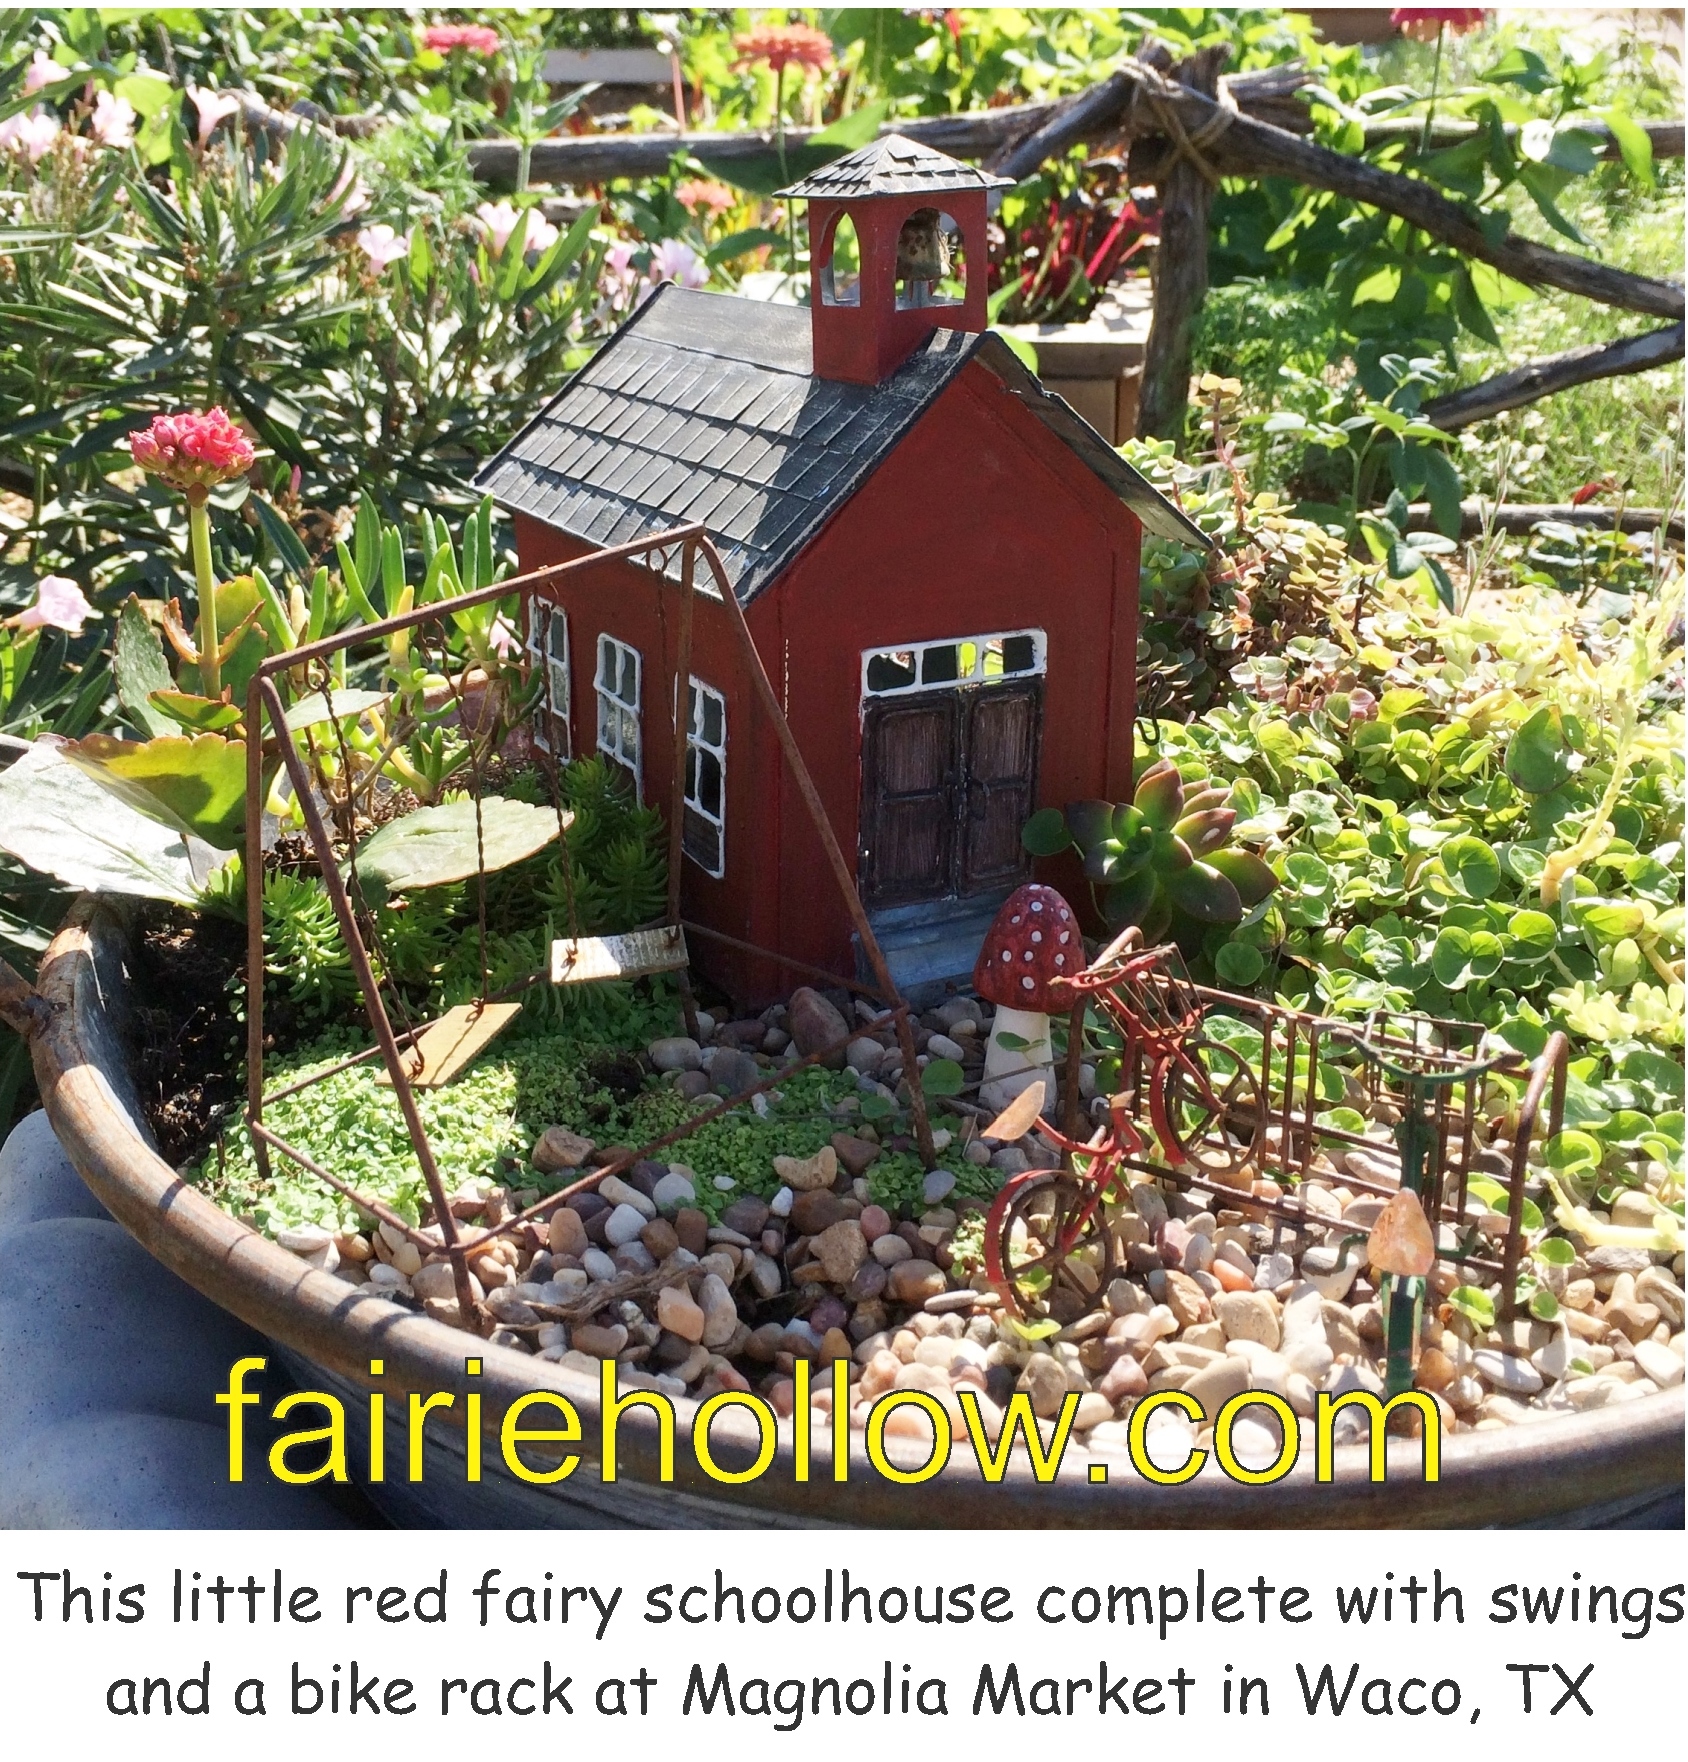 At Magnolia-Market in Waco, Texas, there was this little-red-school-house fairies house| fairiehollow.com